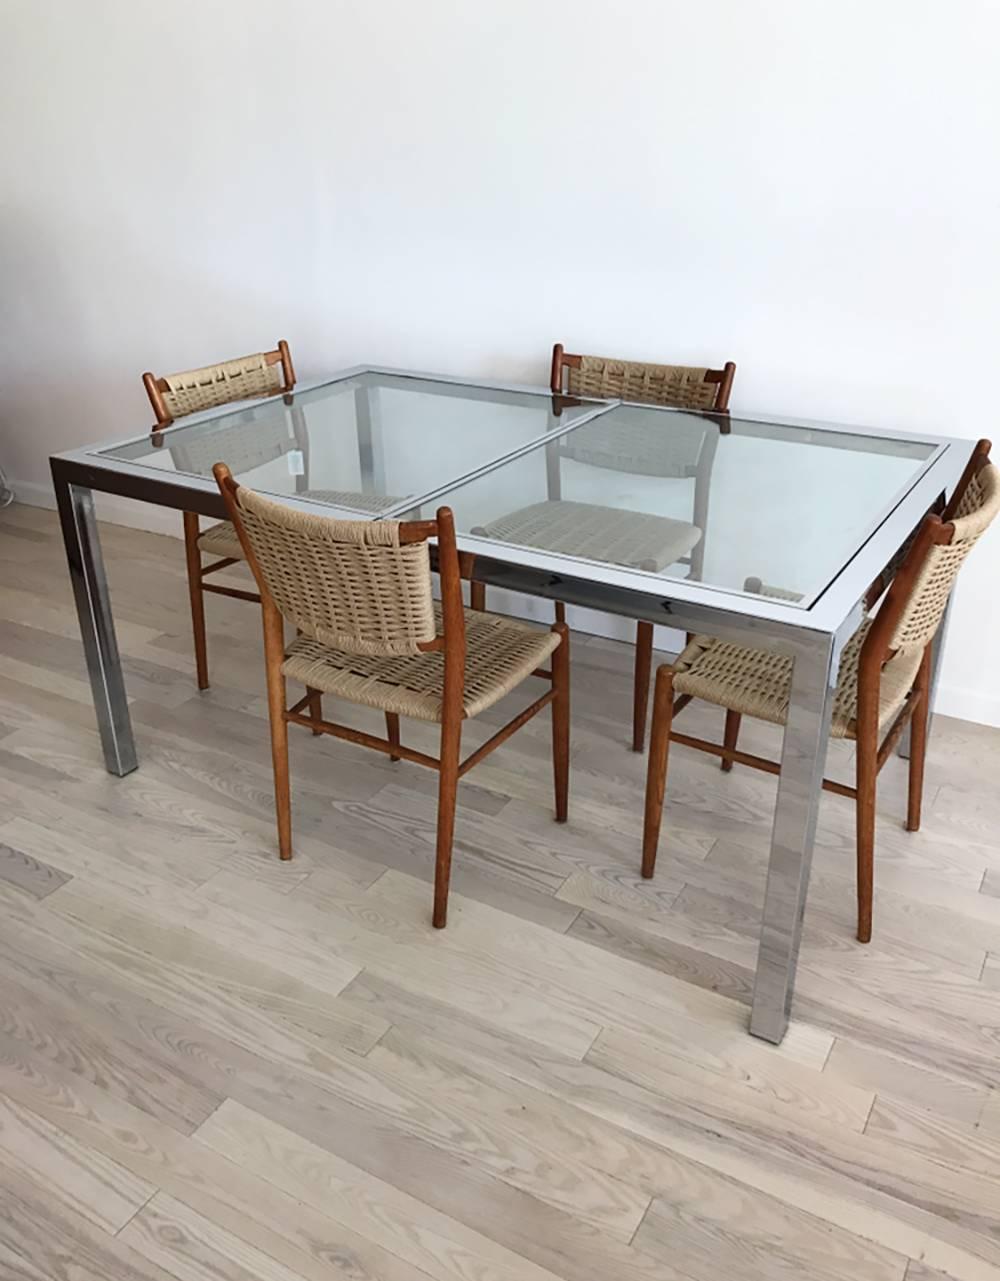 Set of four super rare dining chairs. Midcentury fumed oak Scandinavia dining chair. Designed by Bendt Winge imported by IDG from Norway. Brand new woven Danish cord rope seats and back, the wood frame is from 1958. Simply beautiful, and timeless